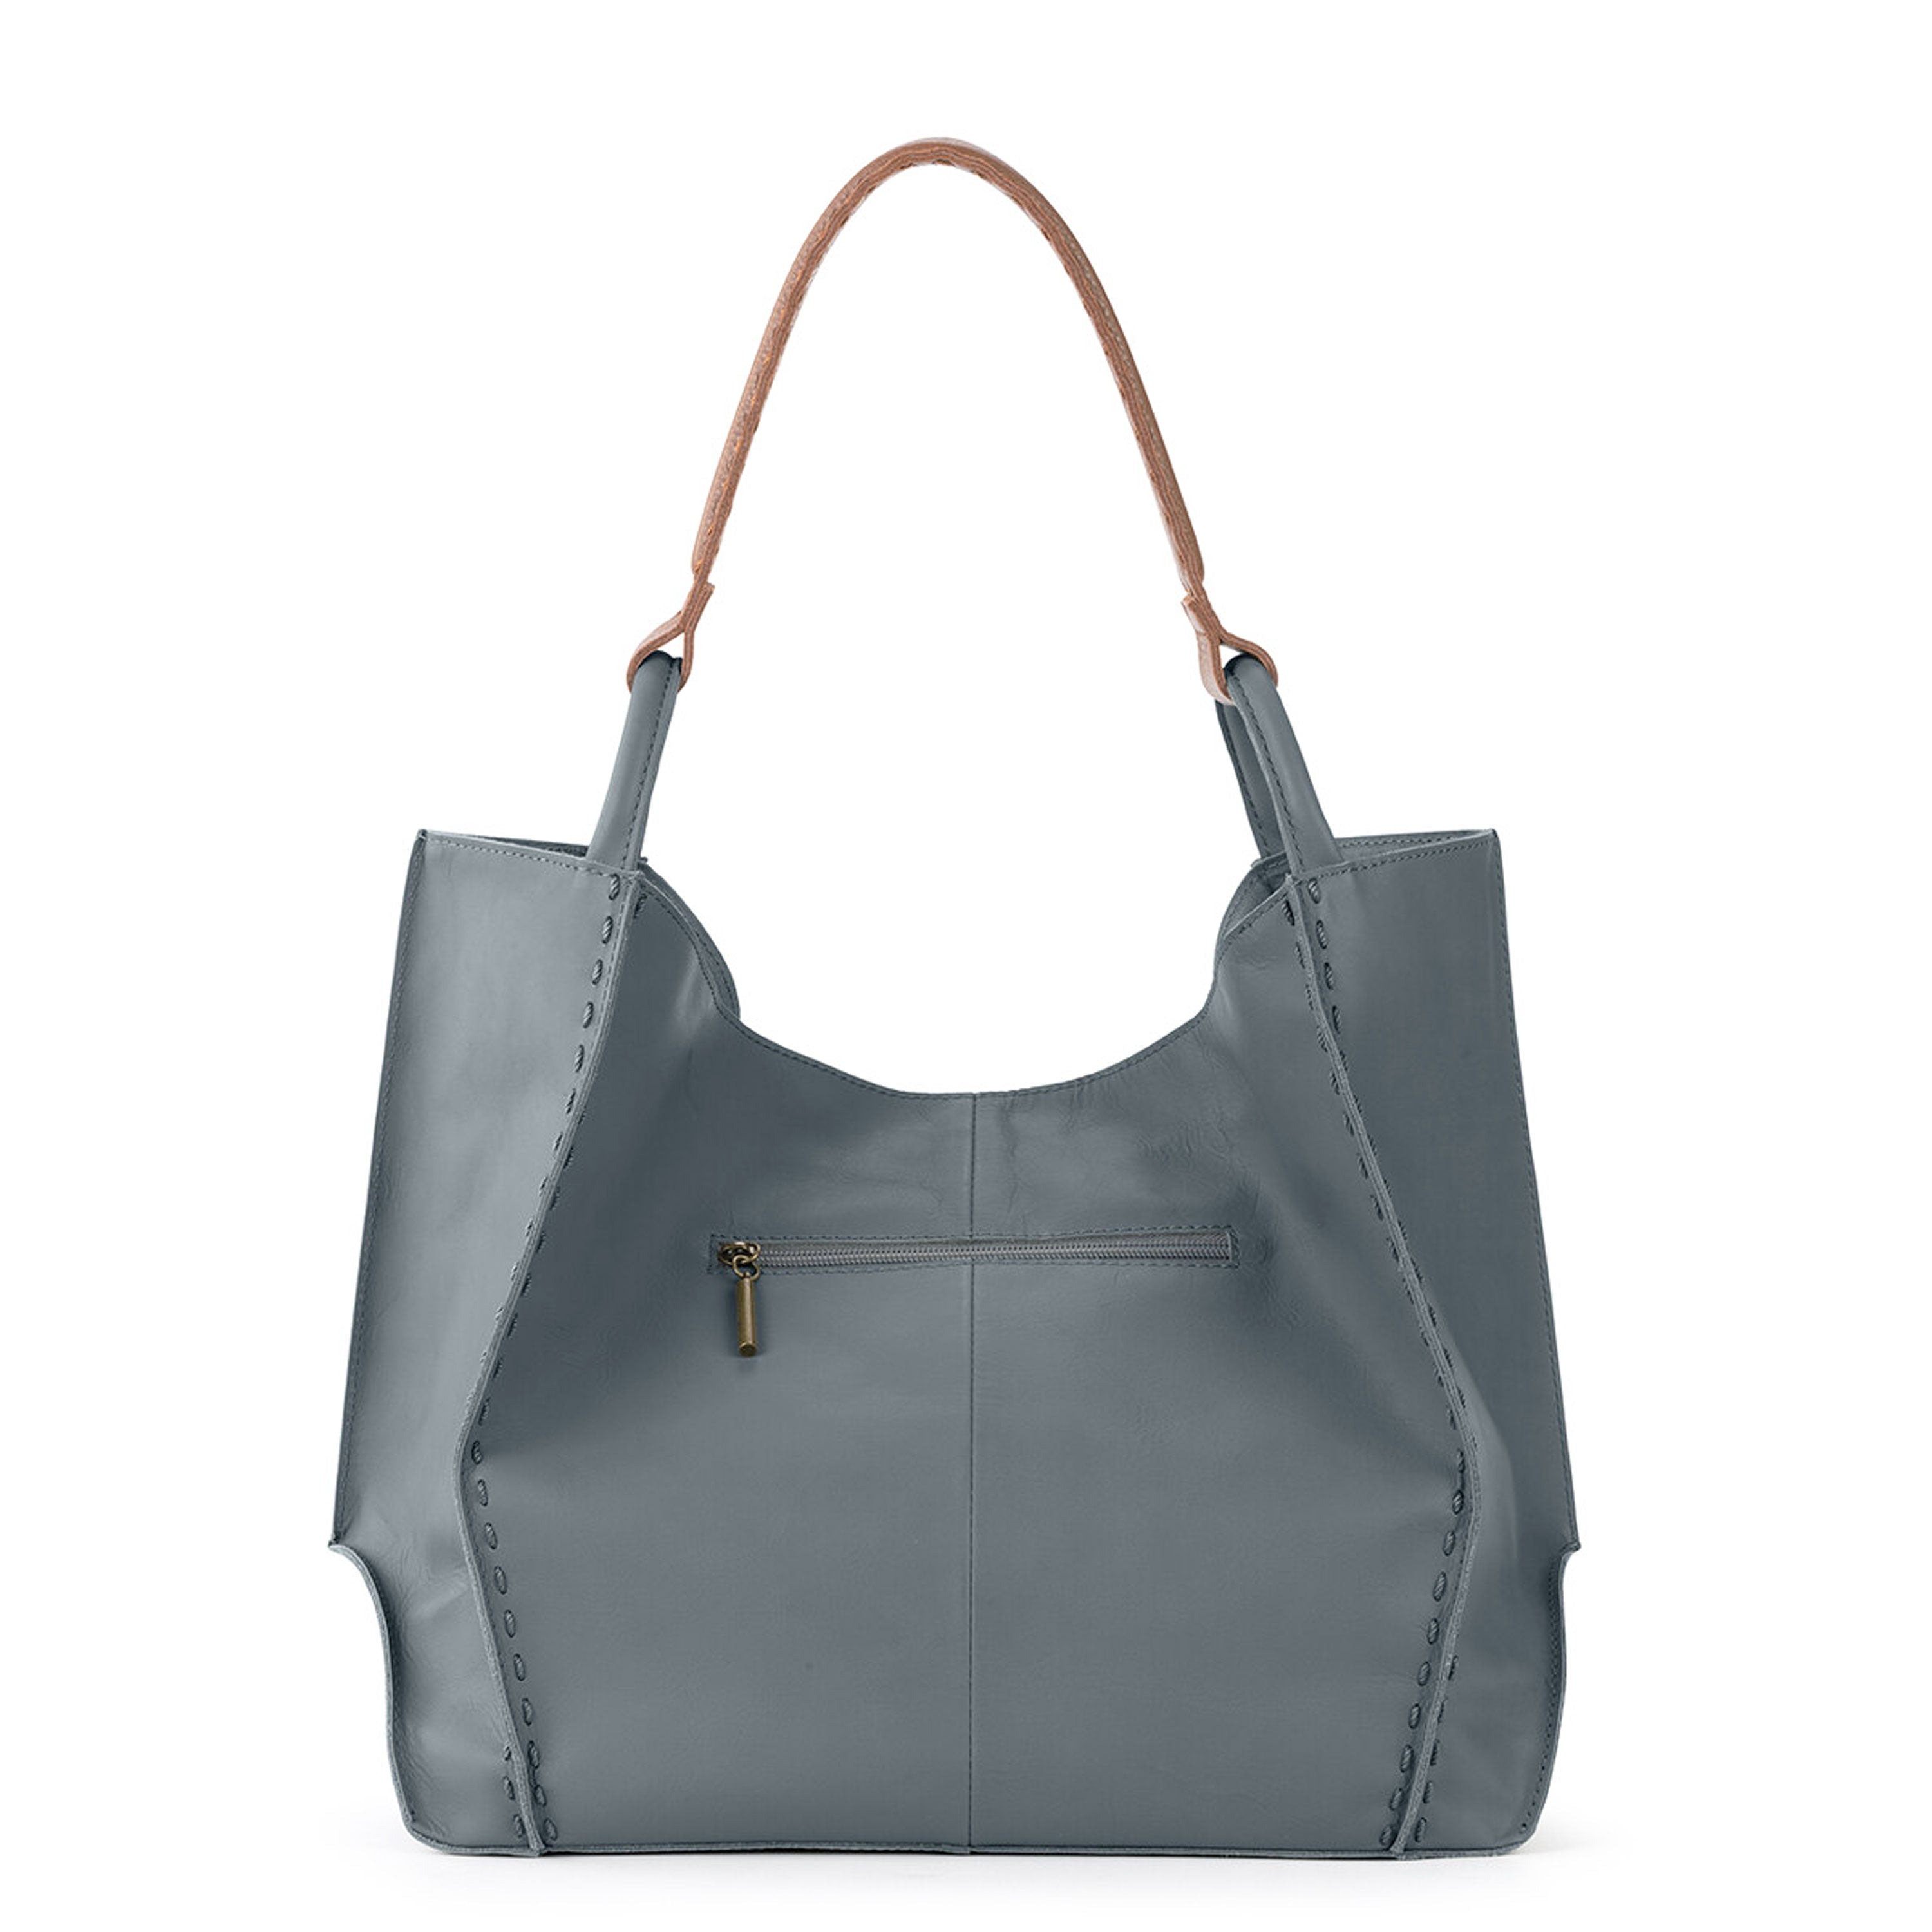 Women's Tote Bags, Woven, Suede, Leather & More